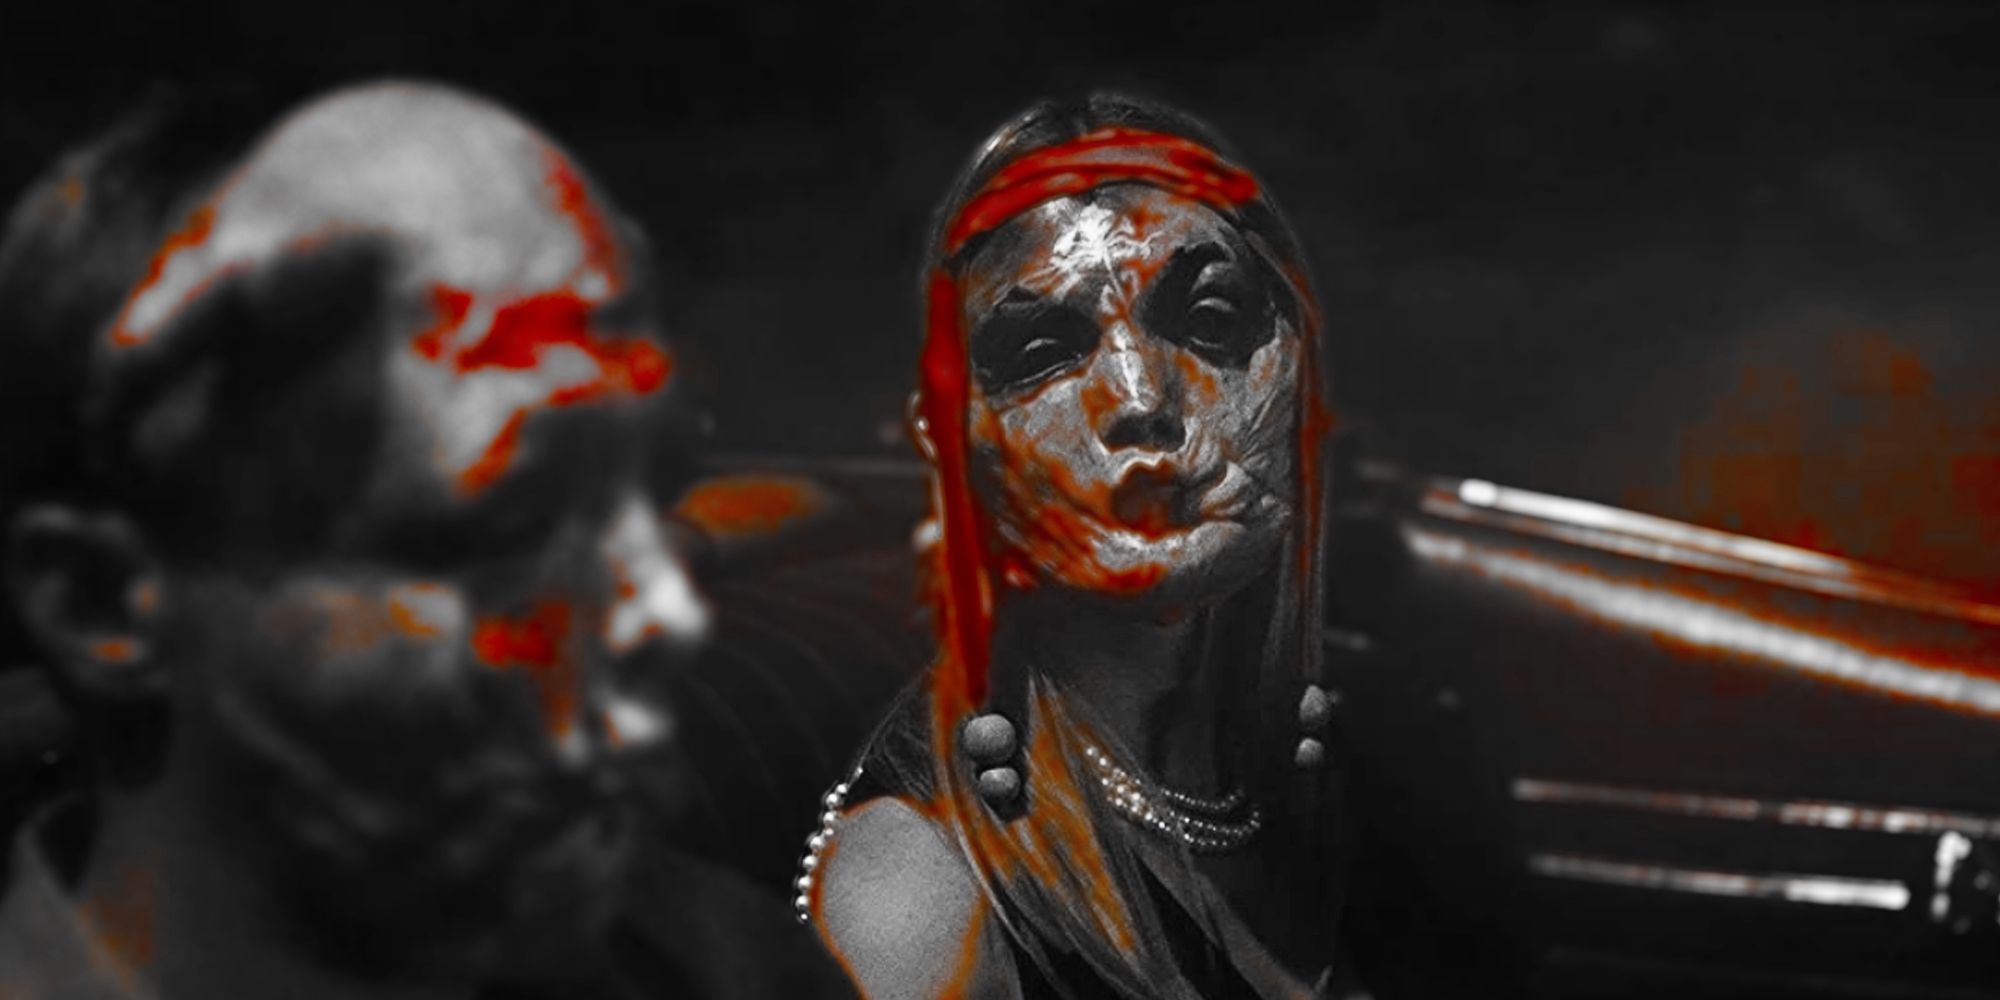 Infinity Pool Alexander Skarsgård and Mia Goth in masks with the red colors highlighted